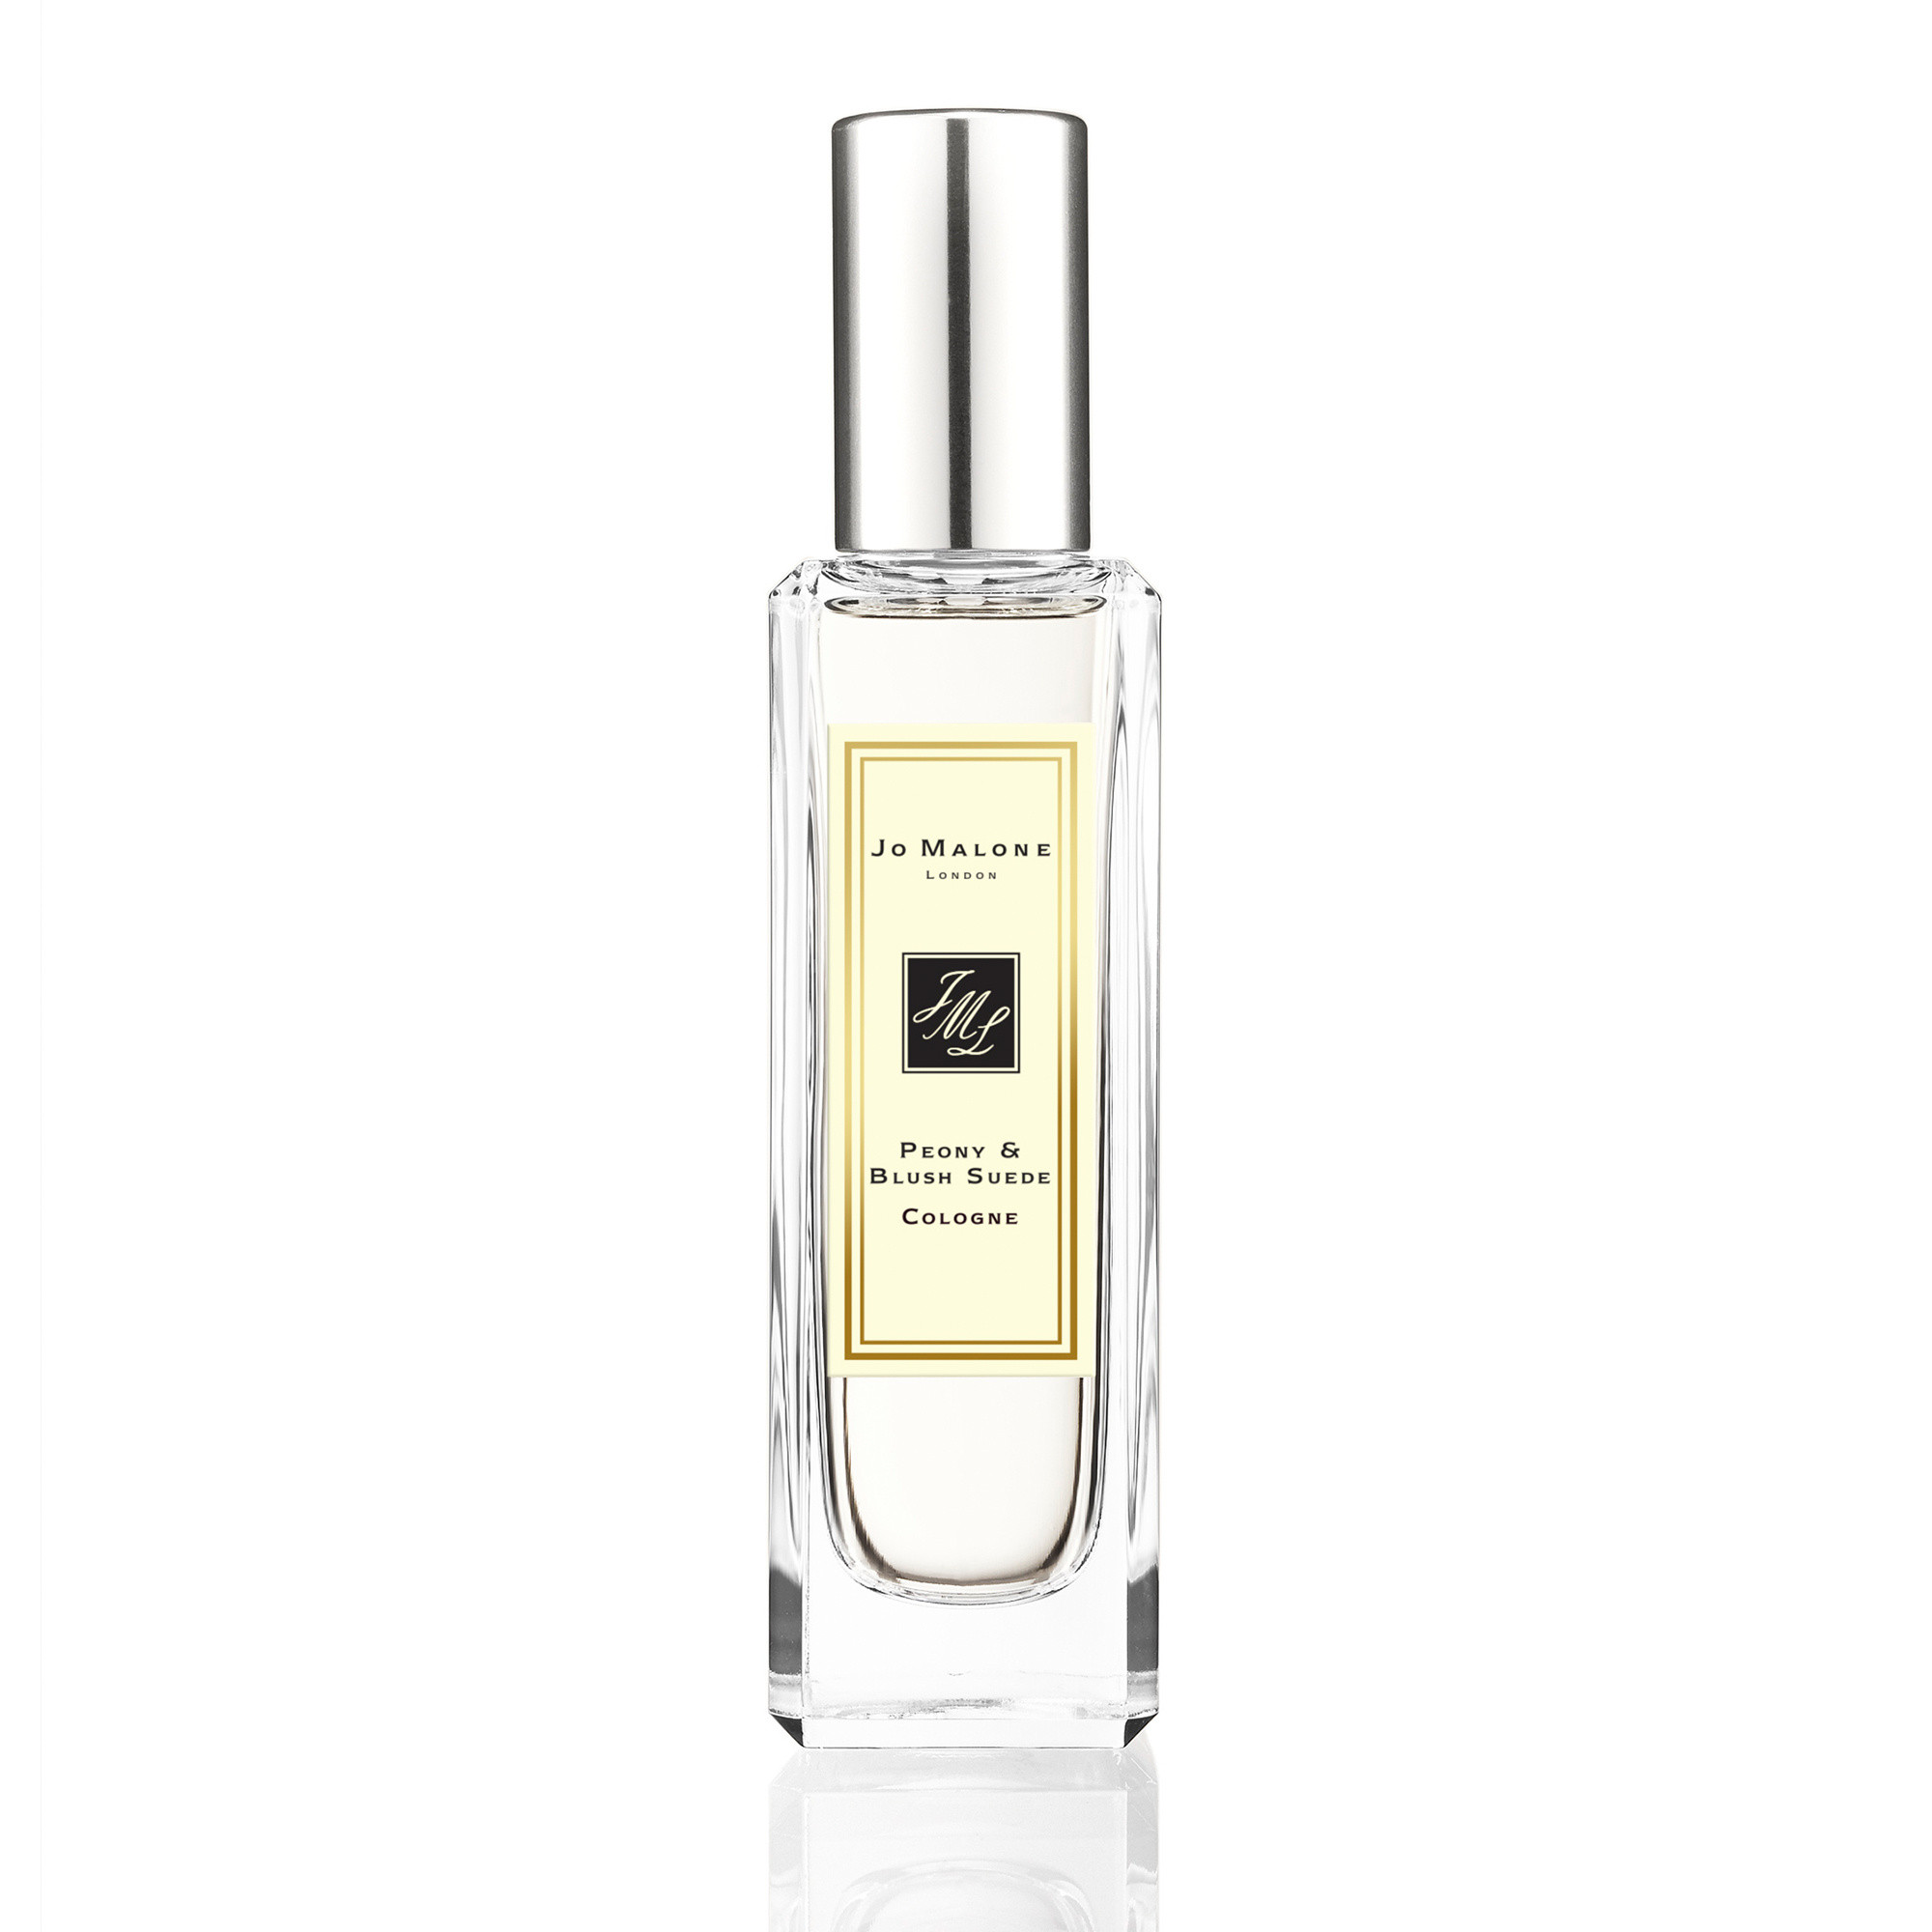 Jo Malone London peony & blush suede cologne 30 ml, Beige, large